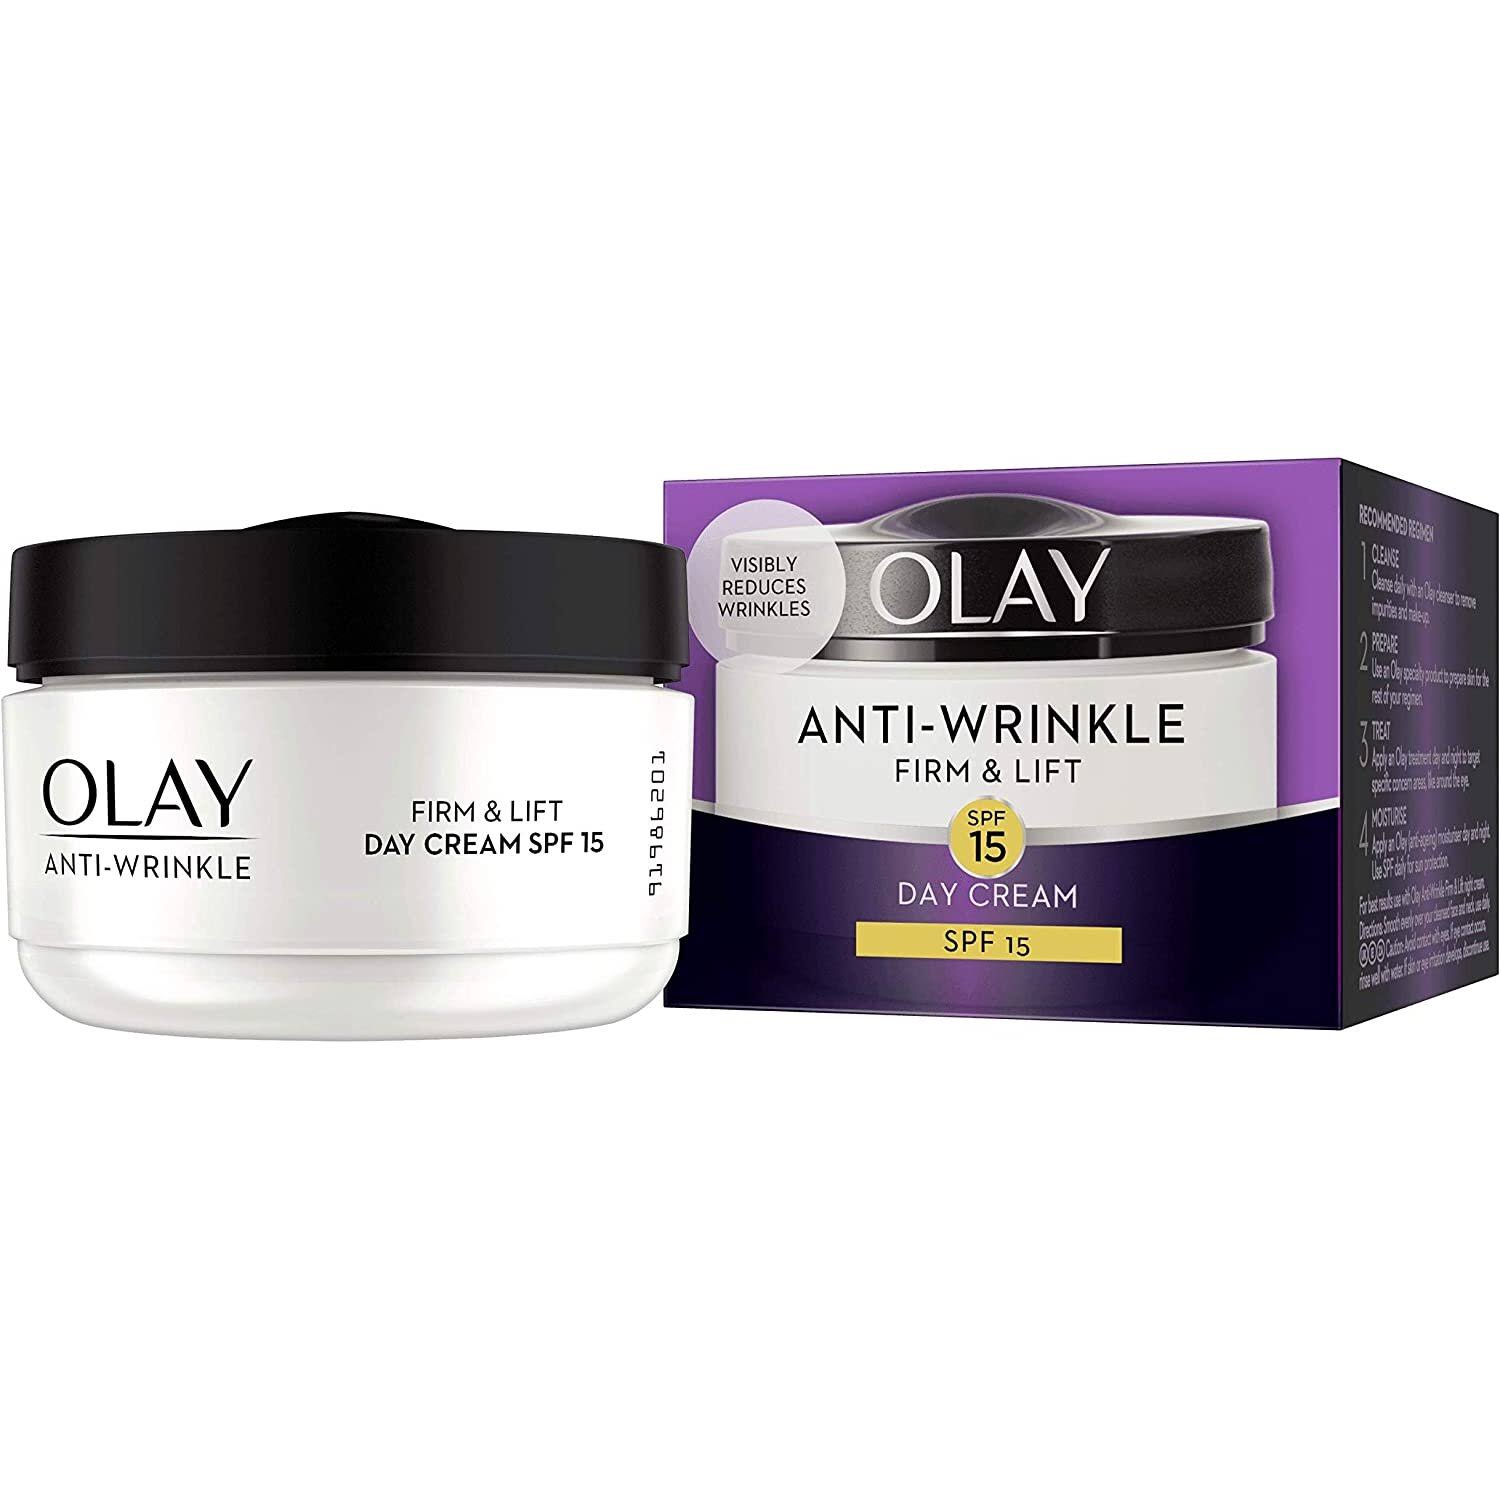 Olay Anti-Wrinkle Firm and Lift Day Cream